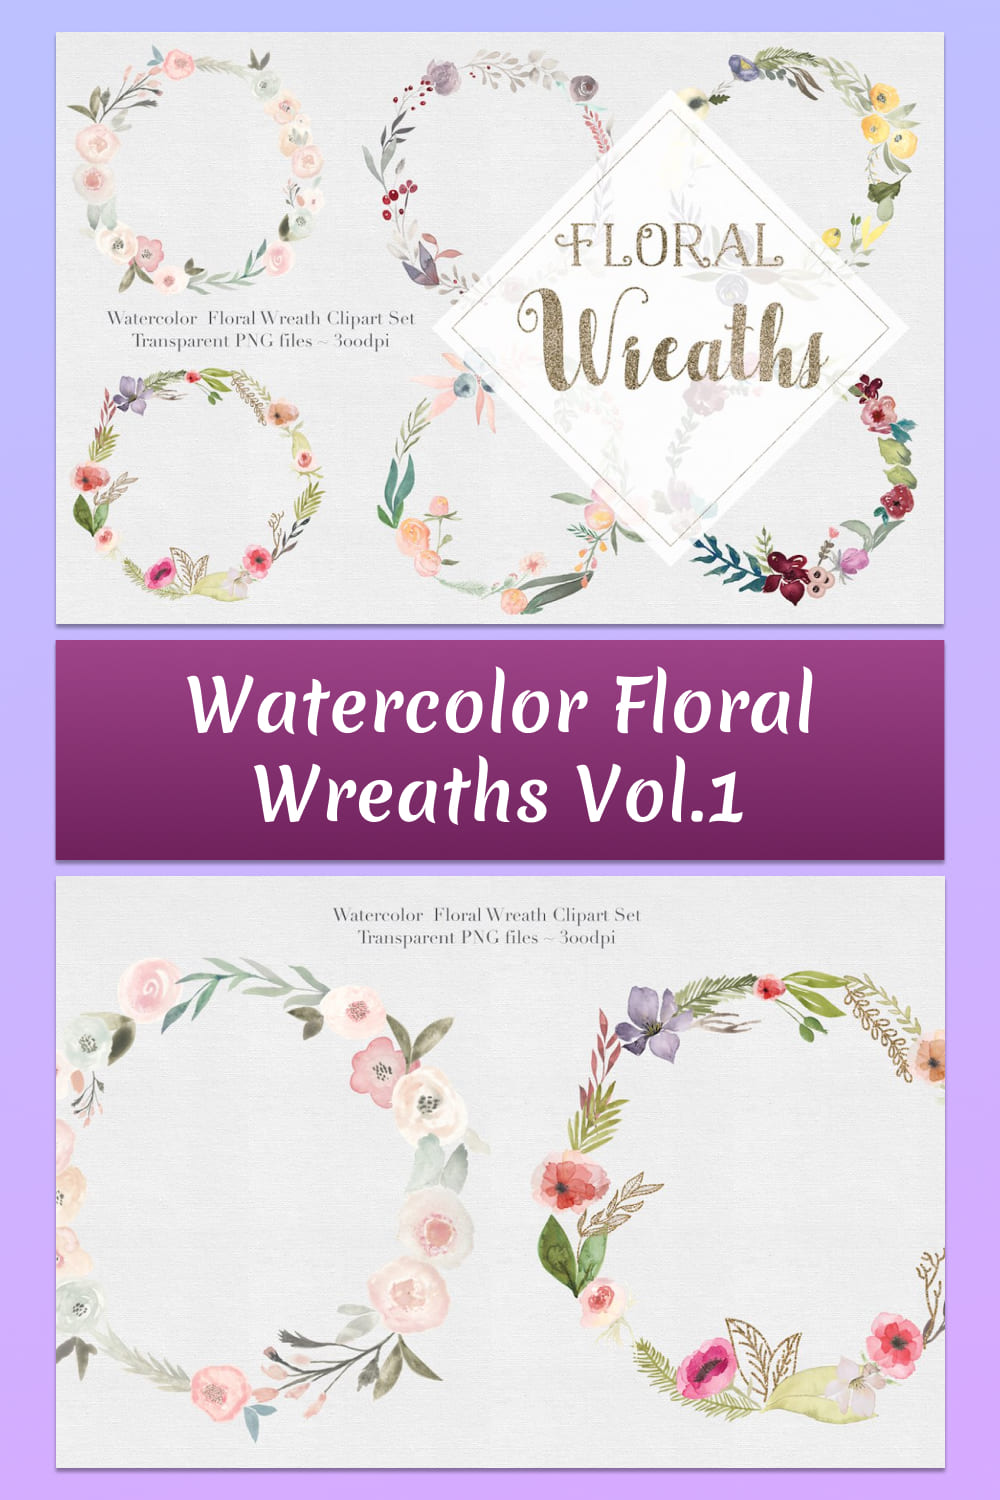 watercolor floral wreaths with flowers and leaves.